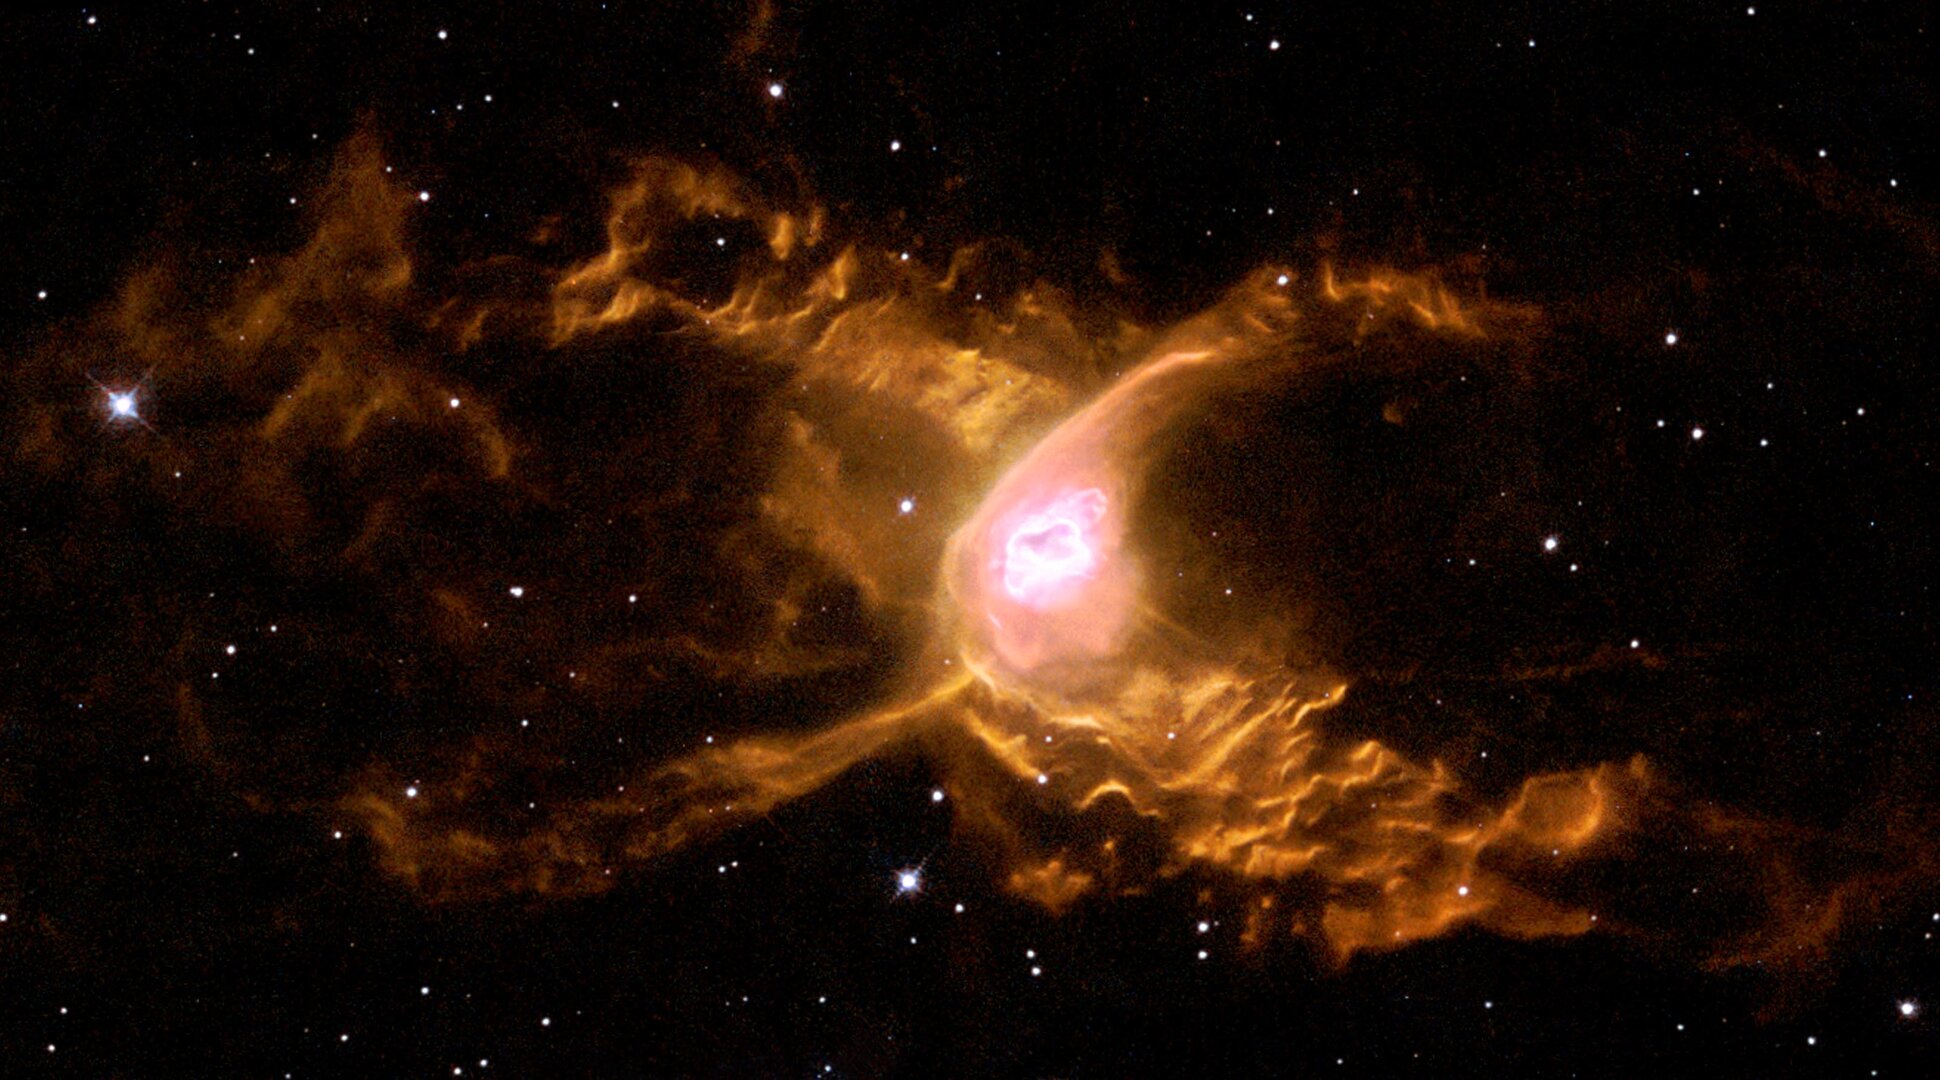 ISO searched for carbonates in the Red Spider Nebula